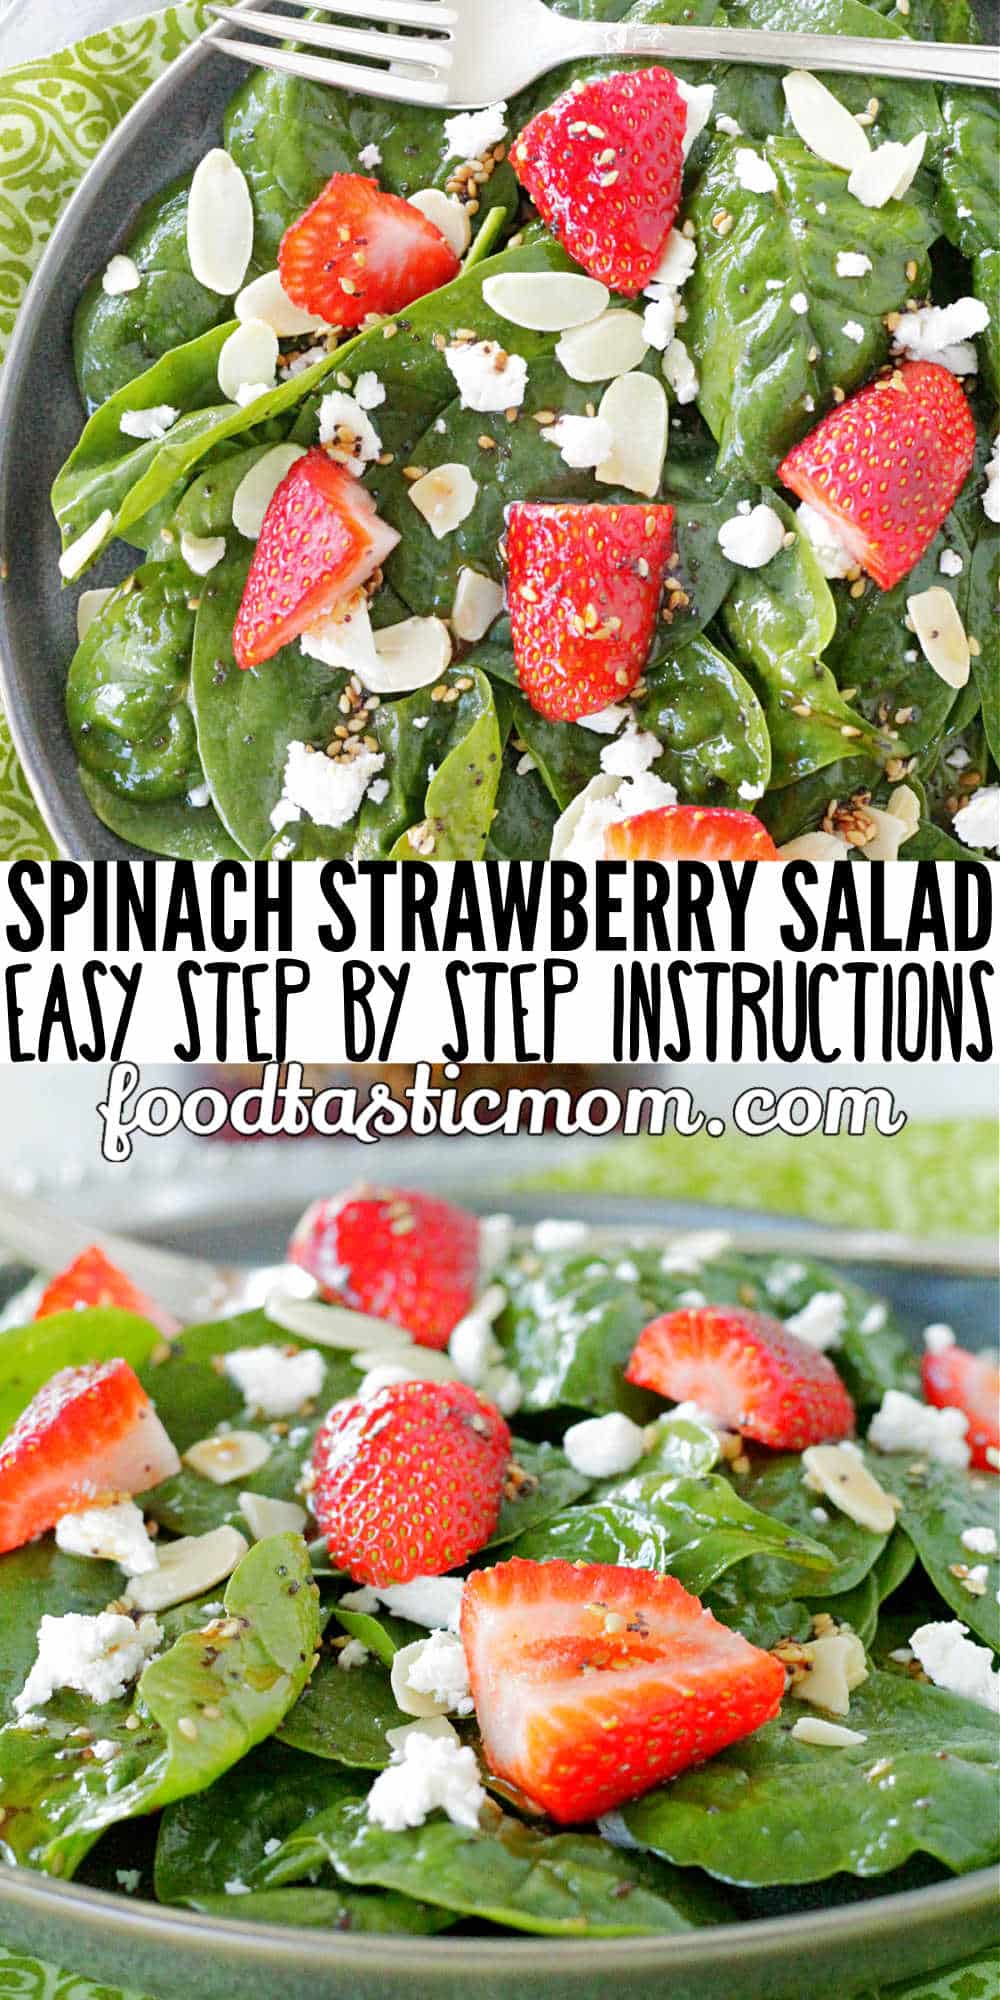 I've made this Spinach Strawberry Salad so many times I've lost count. It's always a crowd-pleaser. Fresh spinach, strawberries, goat cheese and sliced almonds are topped with a sweet and sour toasted sesame seed dressing. via @foodtasticmom